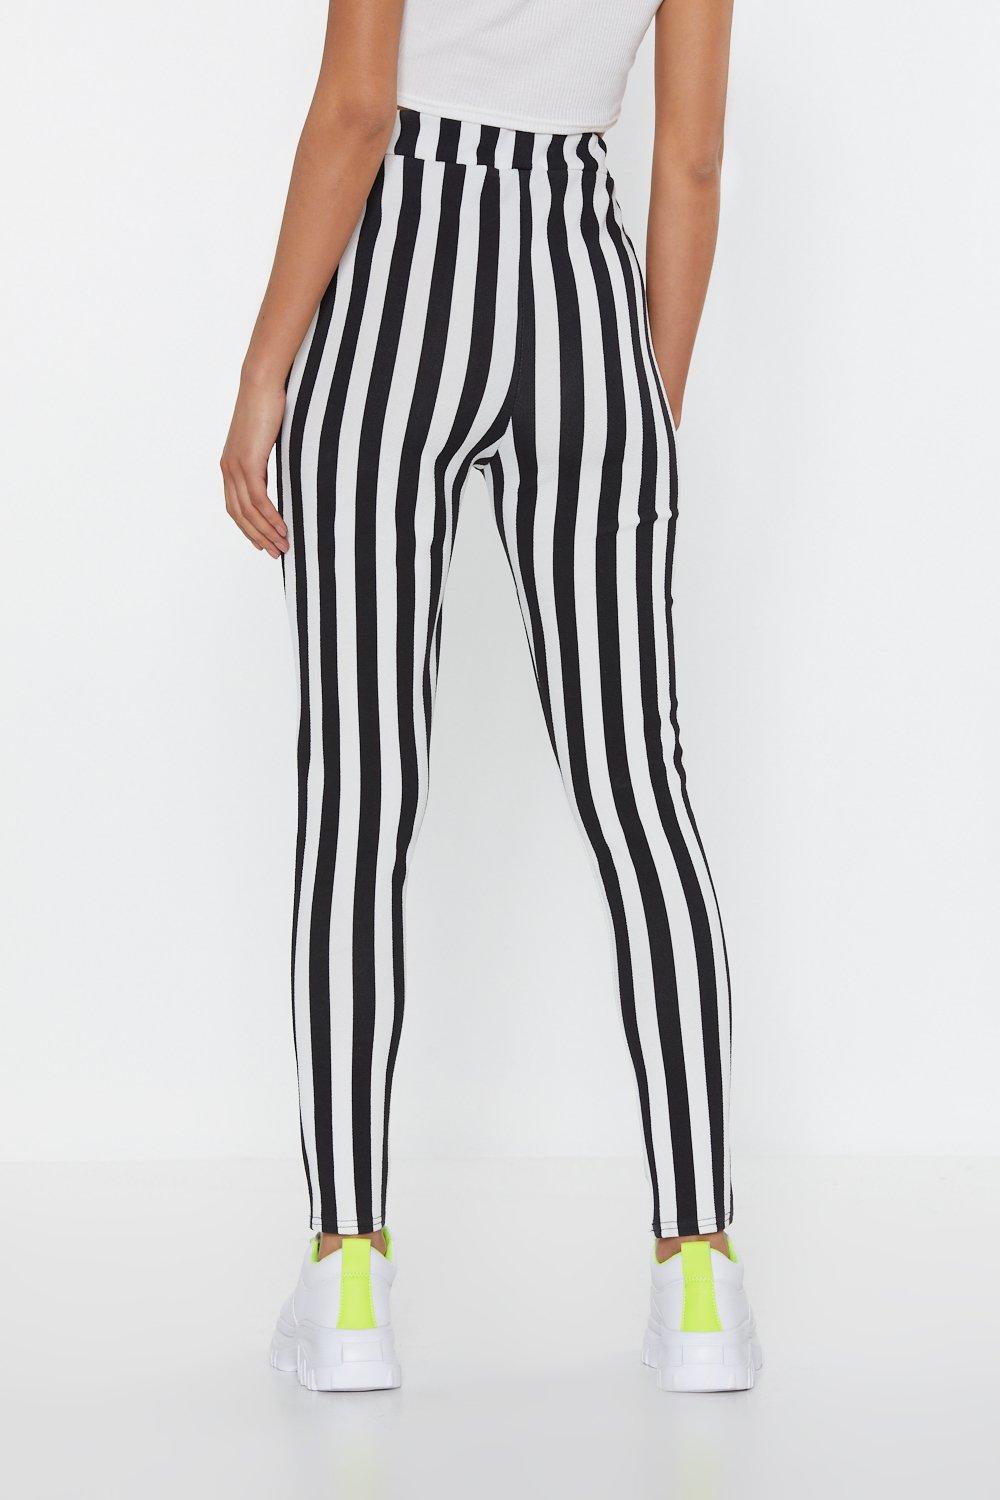 Line Your Pockets Striped Leggings 